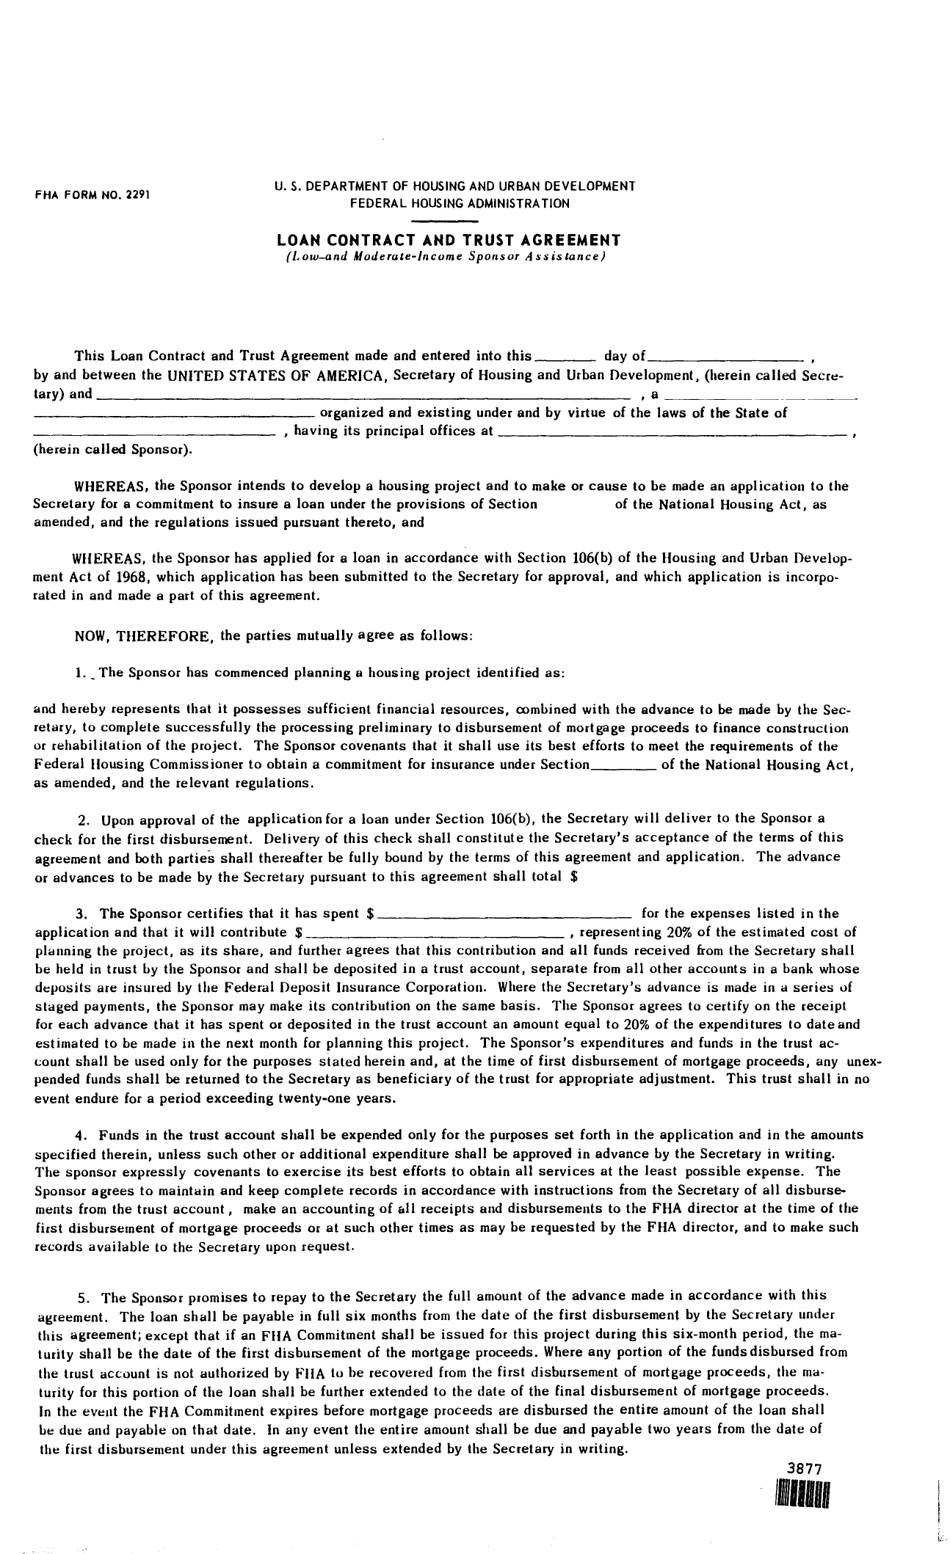 Form FHA-2291 Loan Contract and Trust Agreement (Low-And Moderate-Income Sponsor Assistance), Page 1